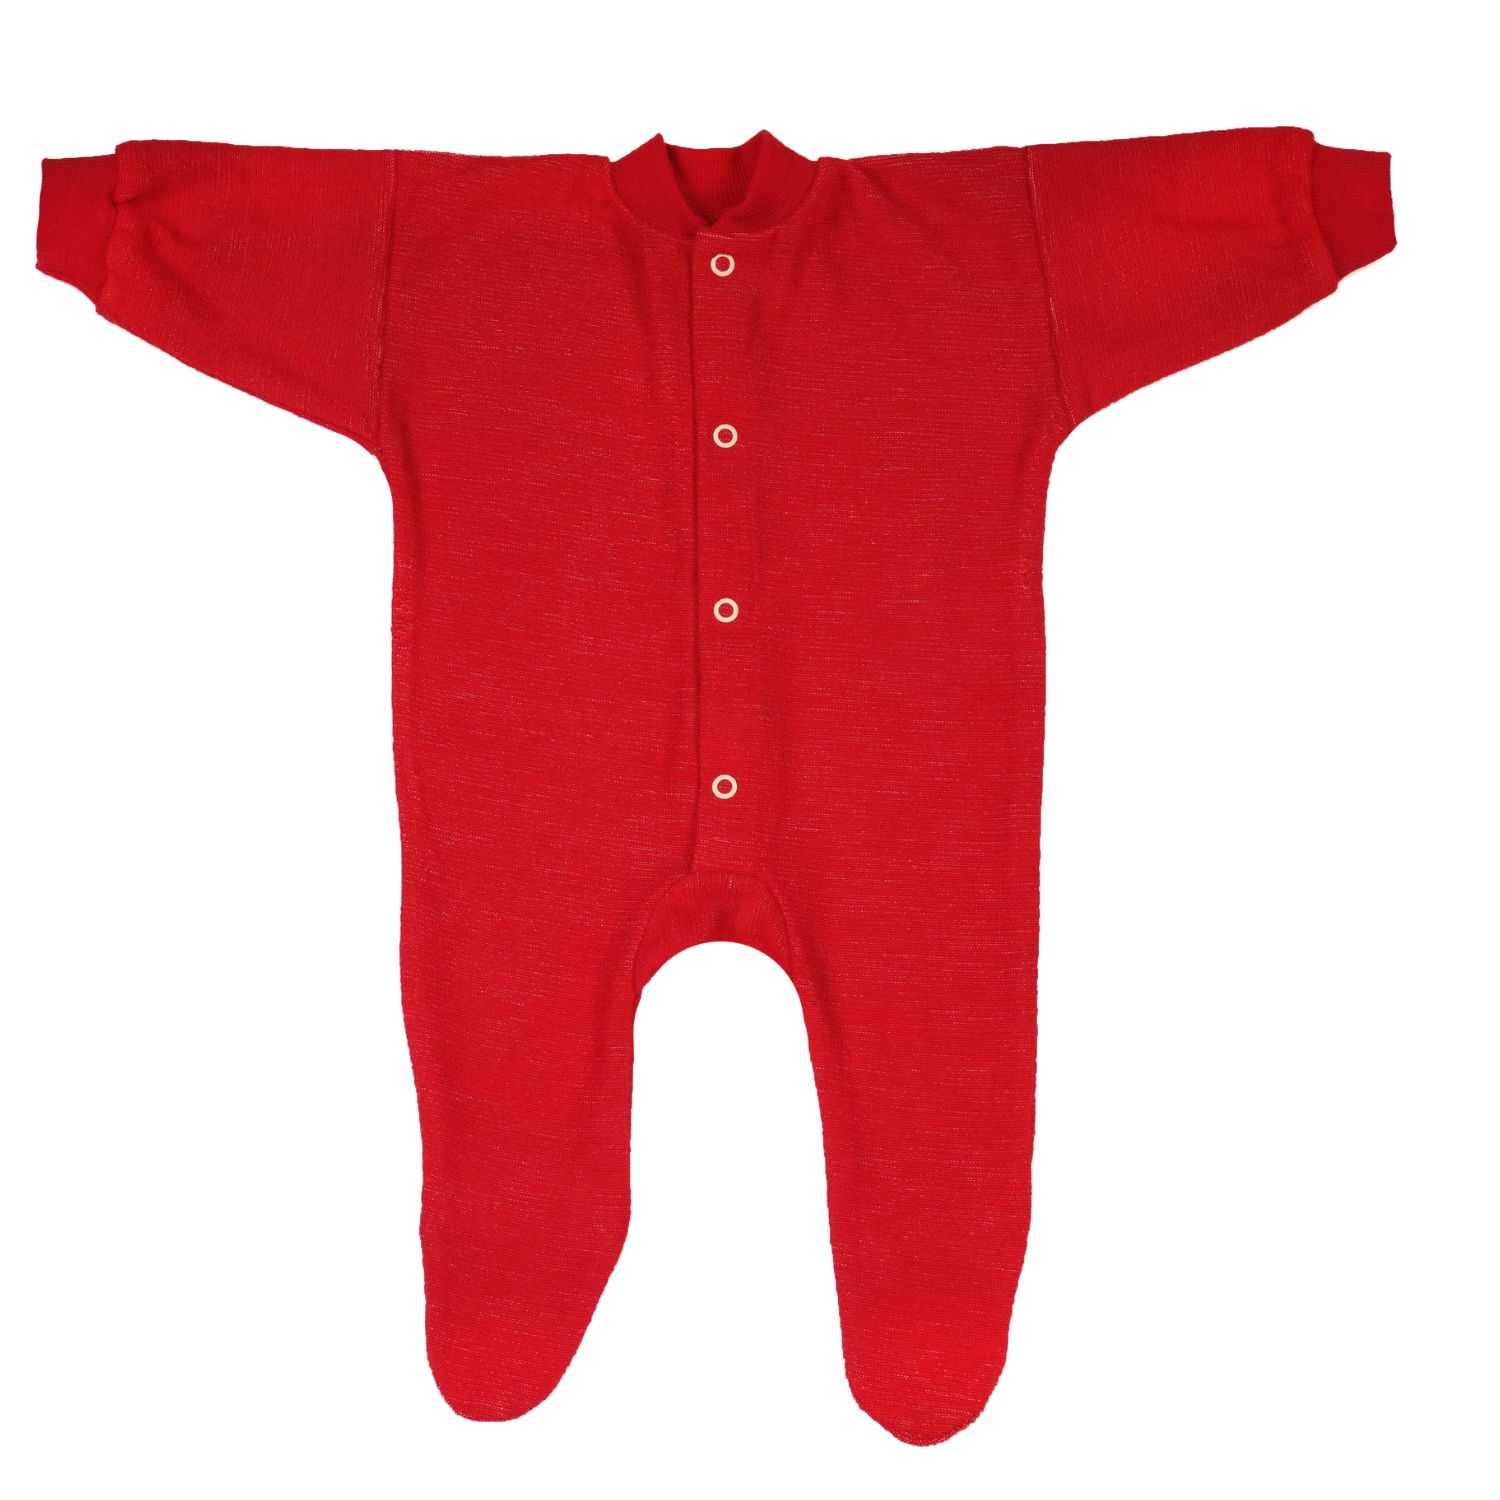 Cosilana one piece pyjama (wool frottee) (Size: 074 / Colour: 04 red)